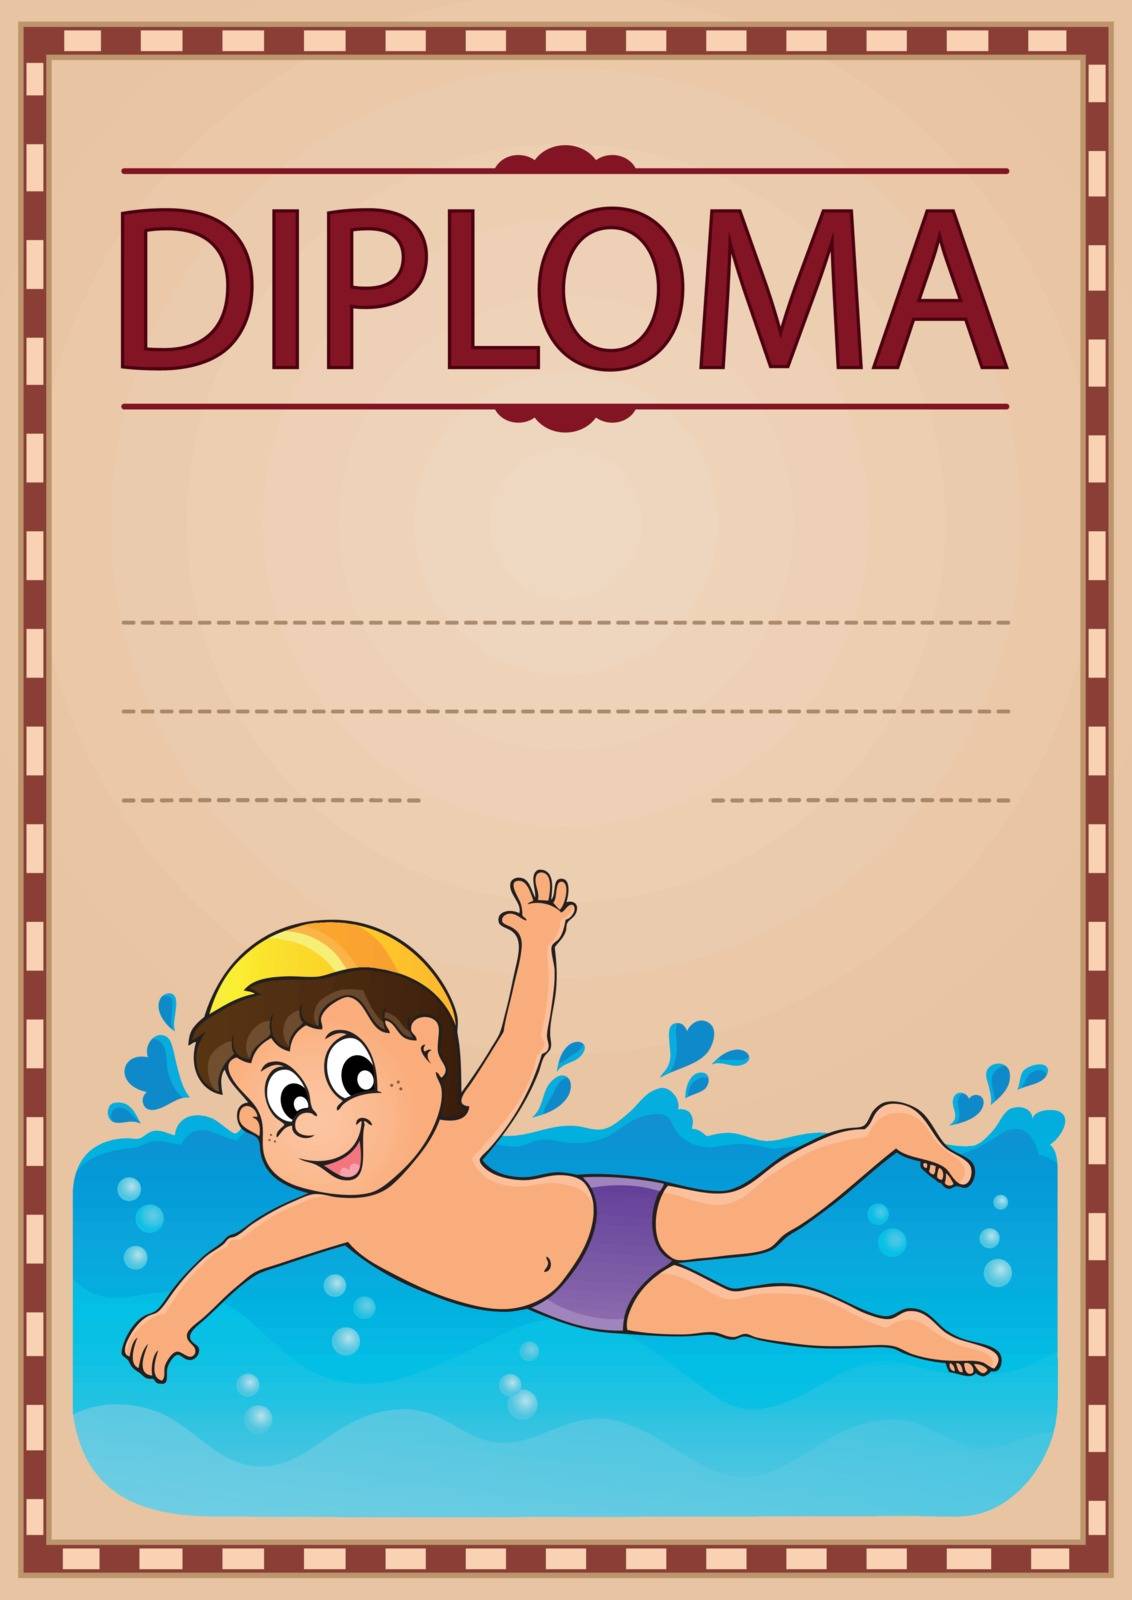 Diploma theme image 5 by clairev